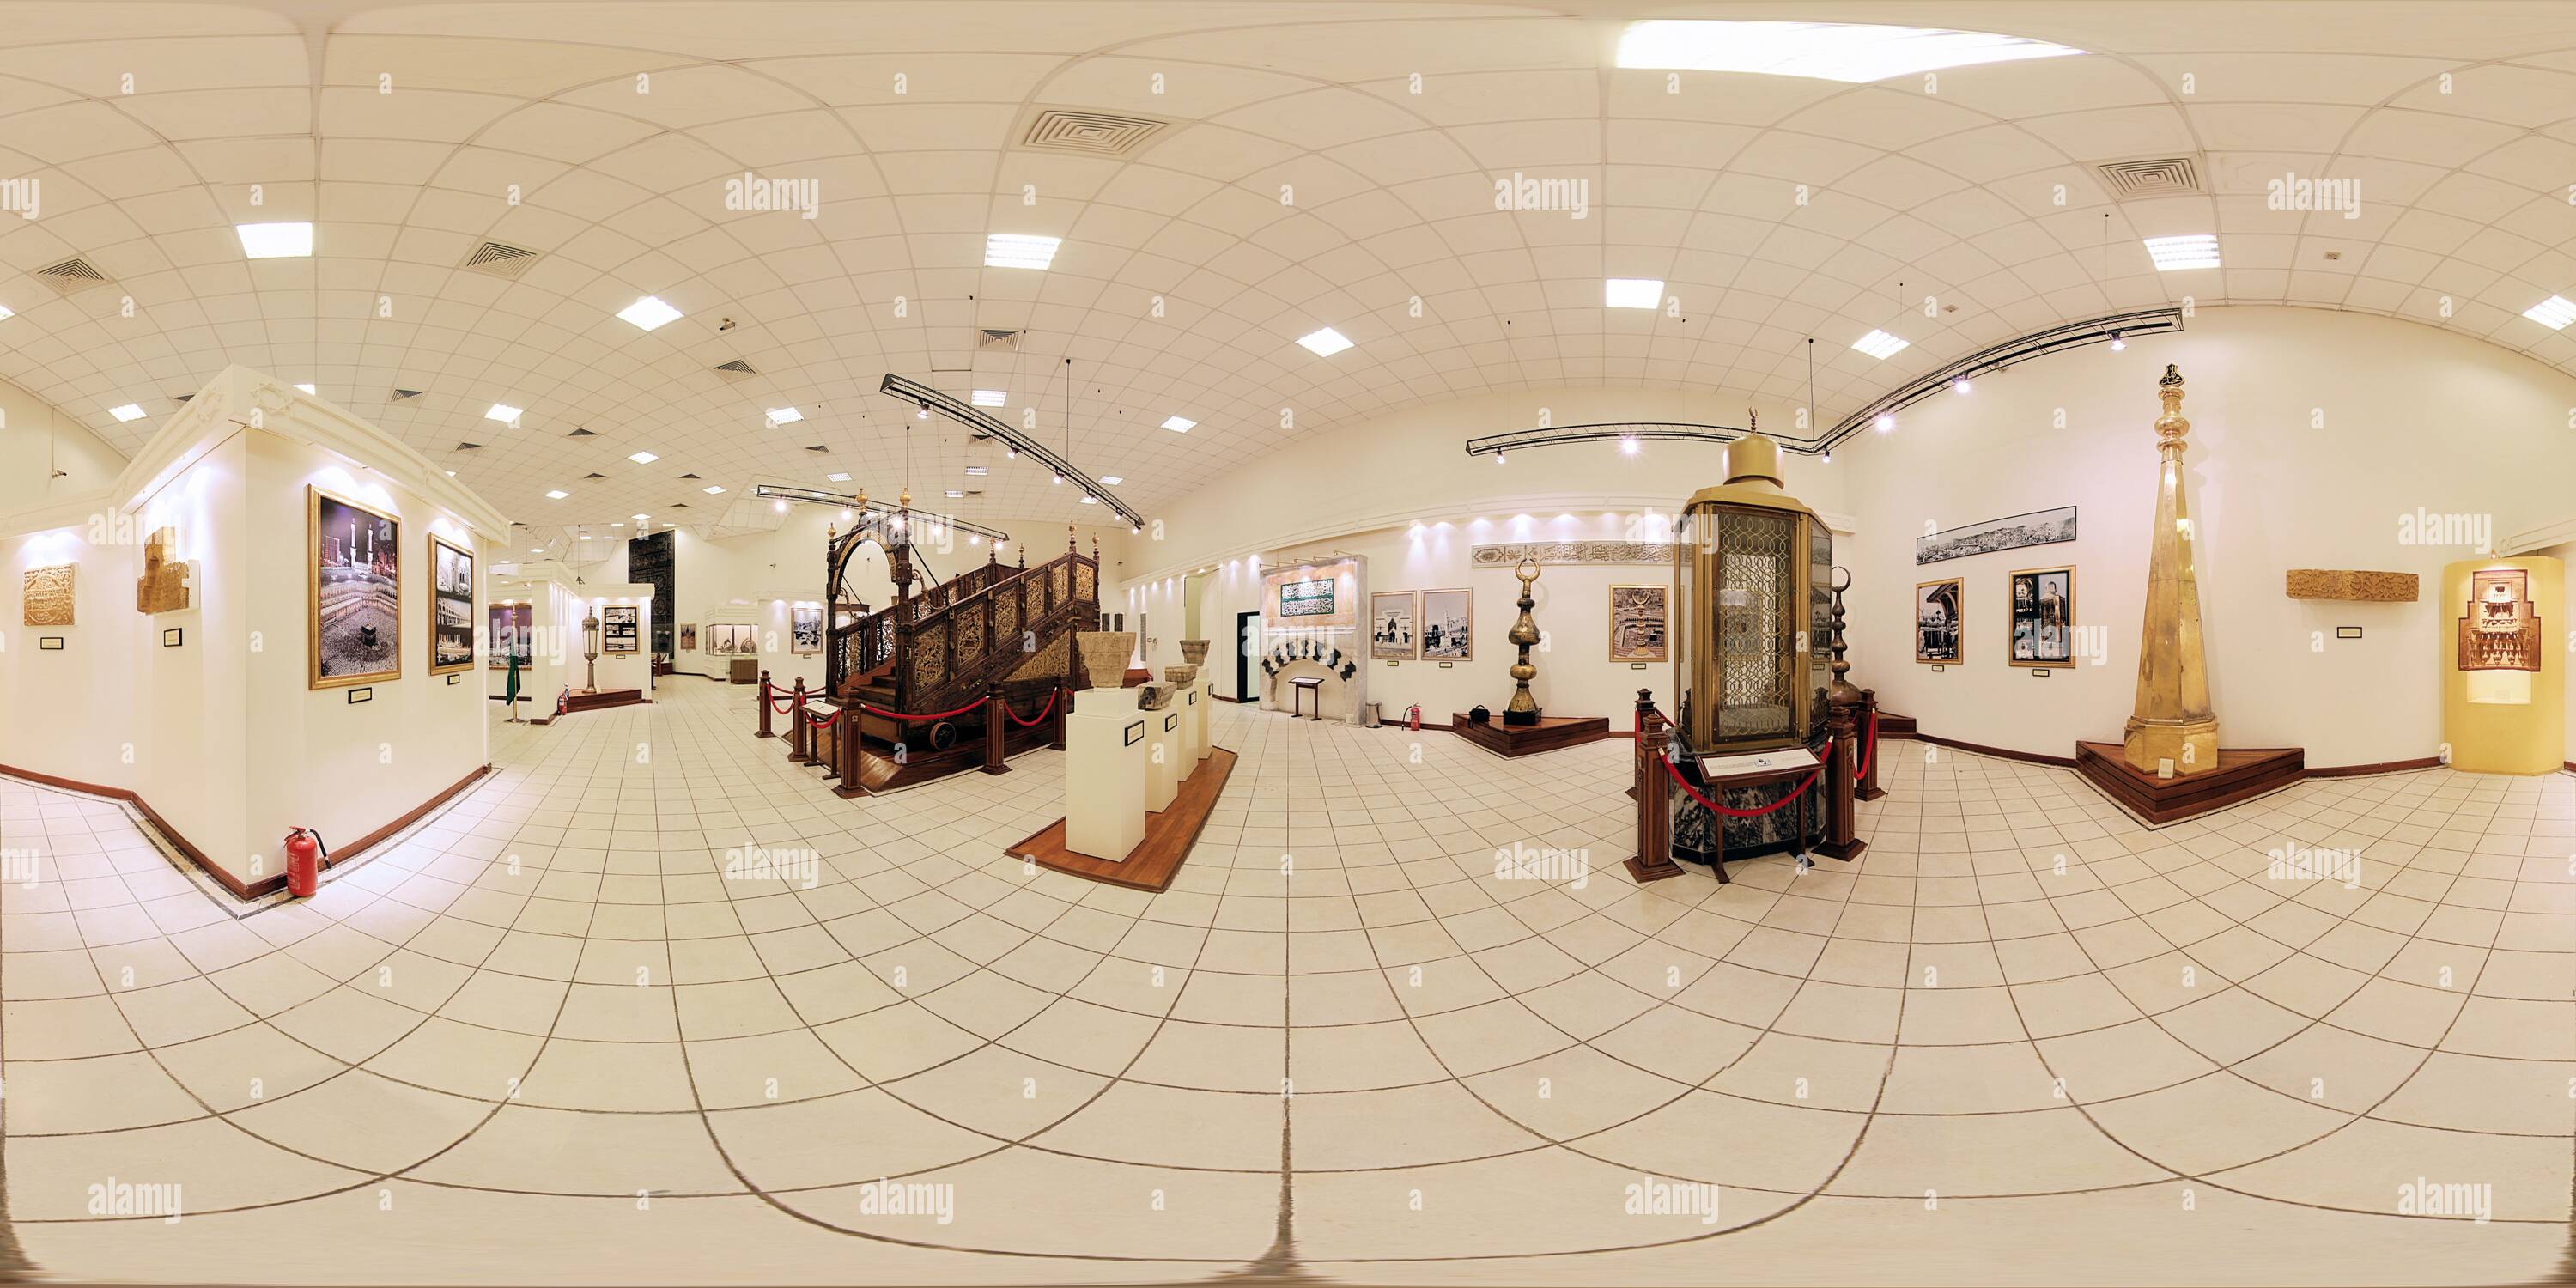  Inside  Kaaba  360 Degree View Download